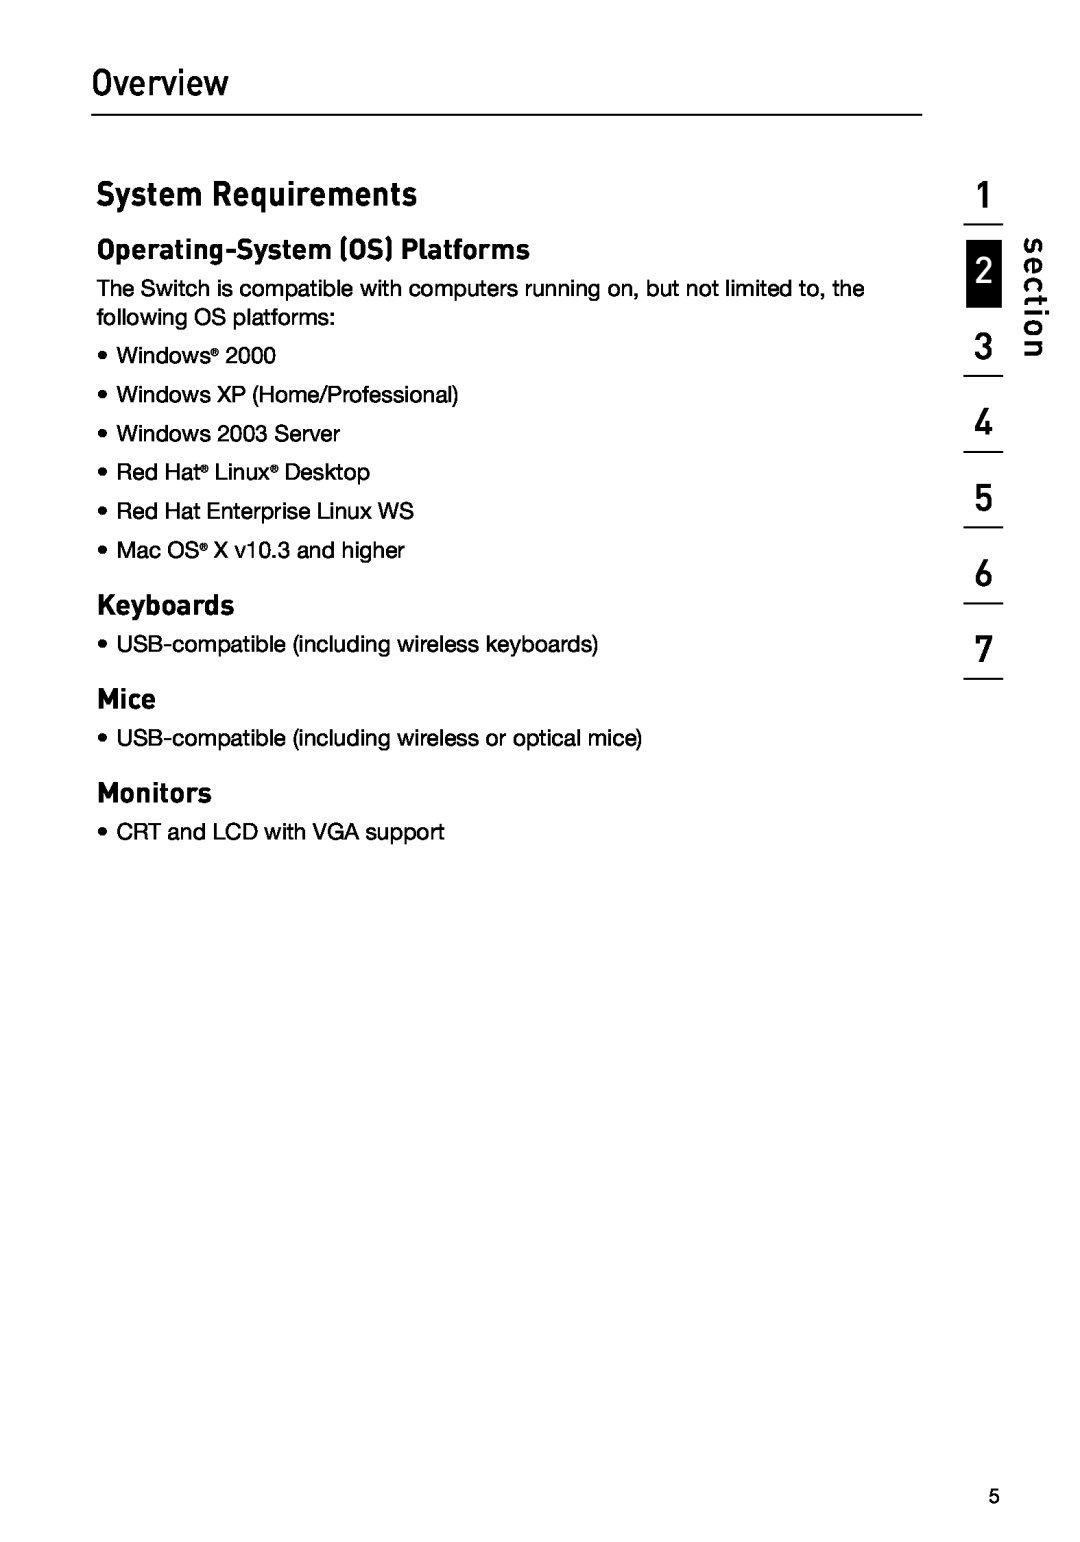 Belkin P75209 manual System Requirements, Operating-System OS Platforms, Keyboards, Mice, Monitors, Overview, section 